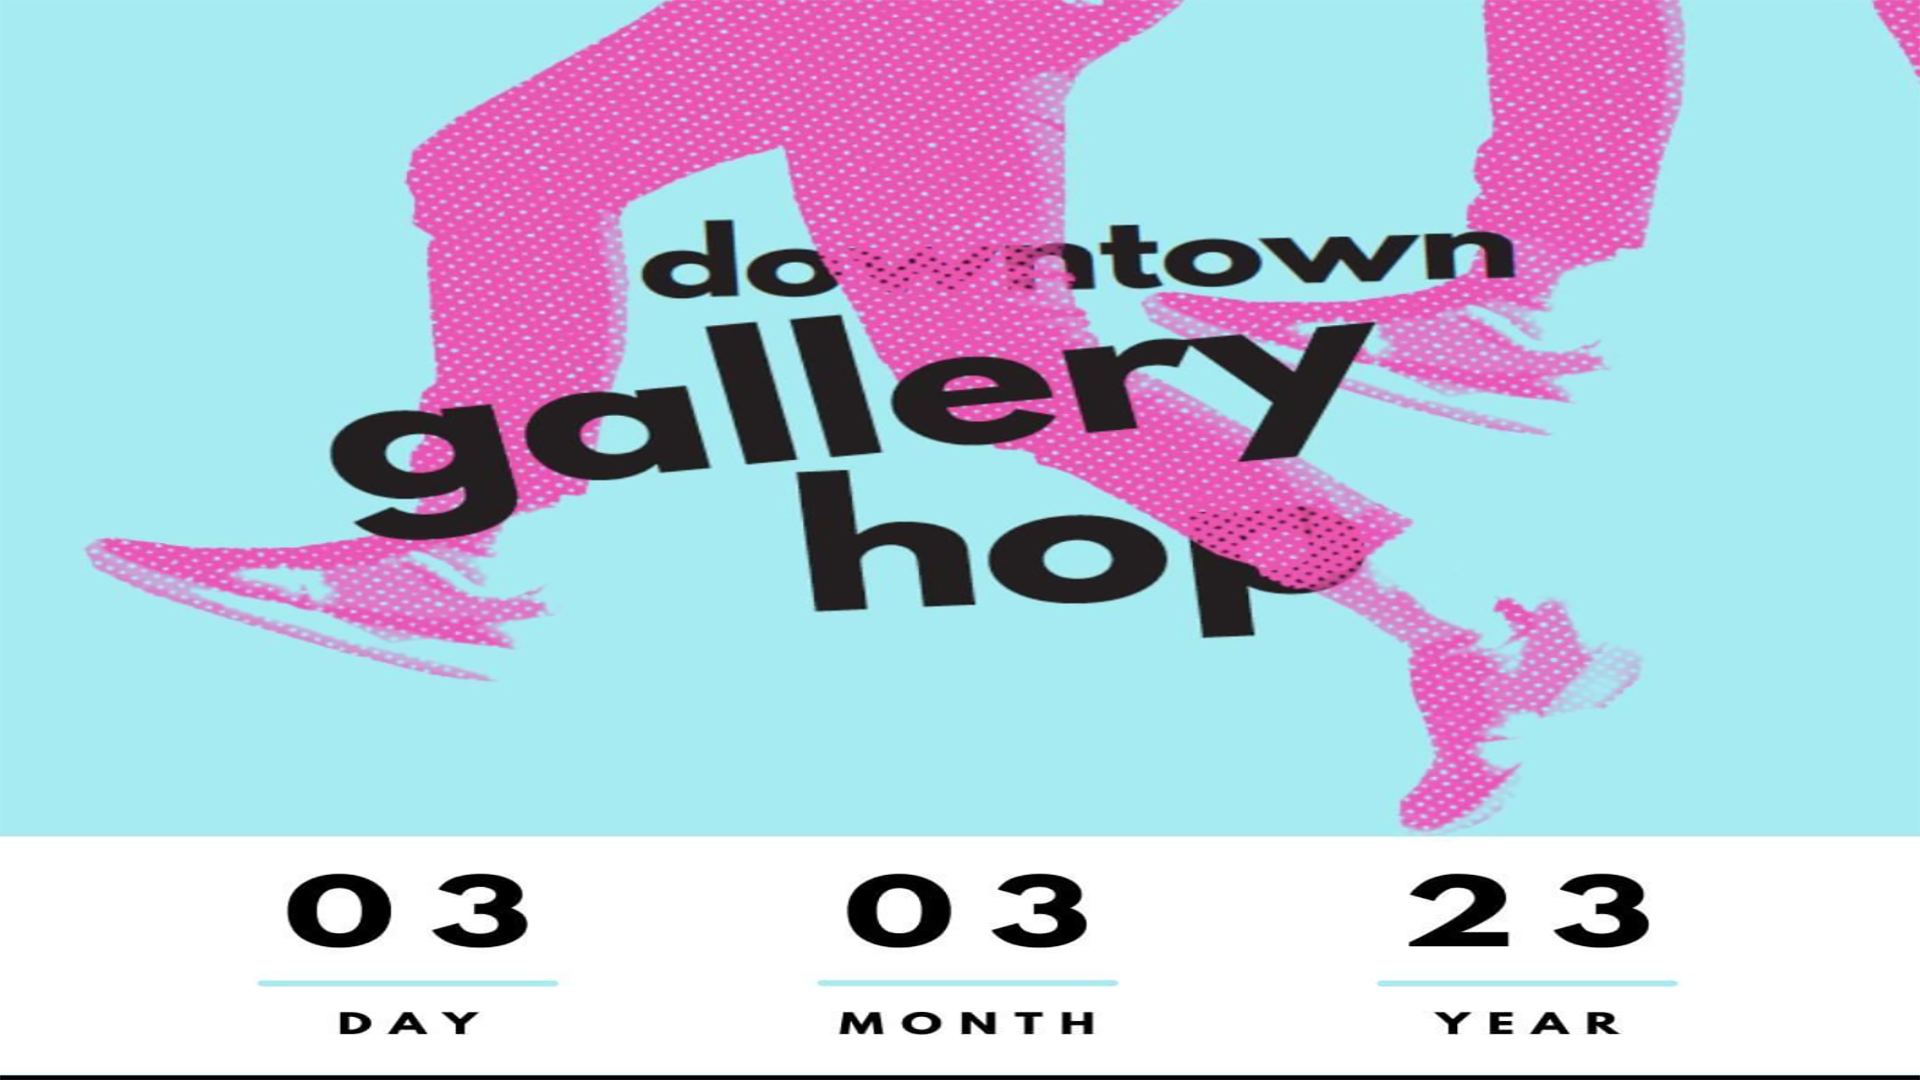 Downtown Gallery Hop - March 3rd